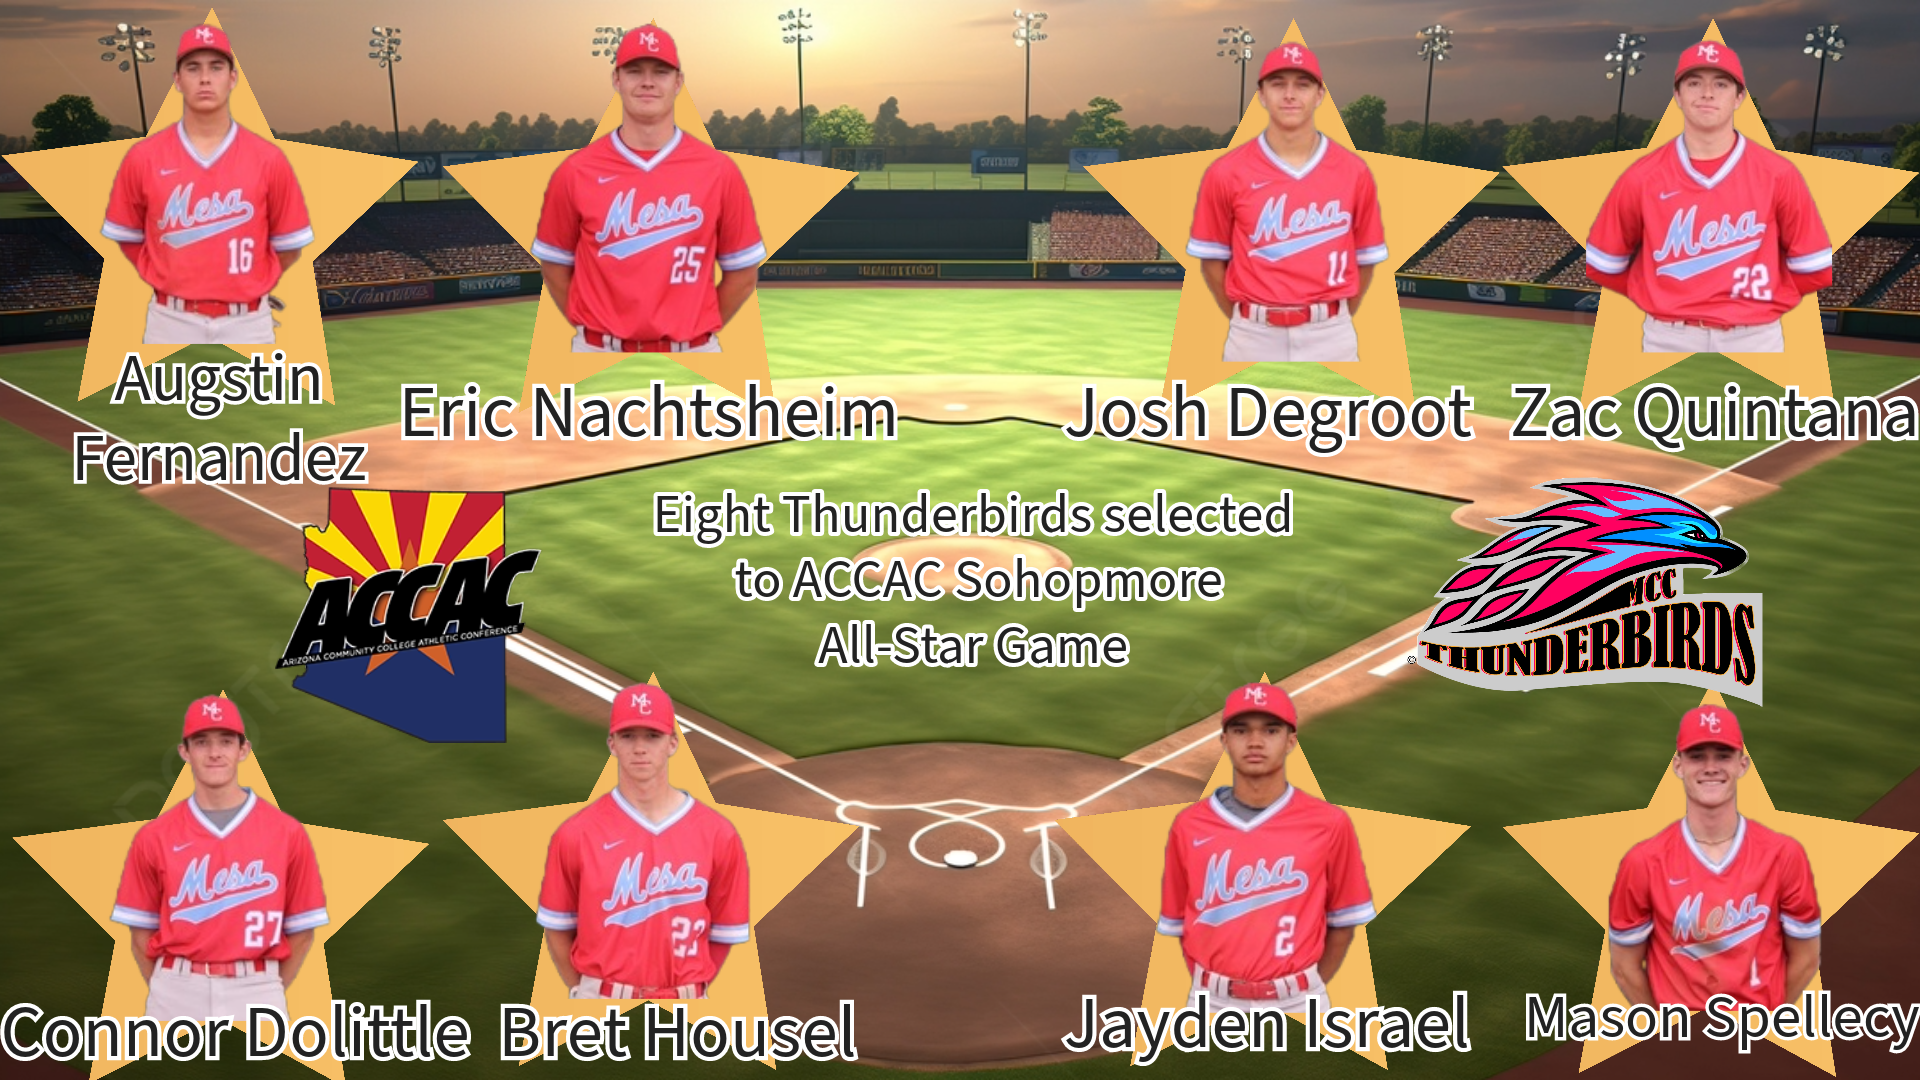 MCC Baseball sends eight sophomores to ACCAC Sophomore All-Star Game on Friday